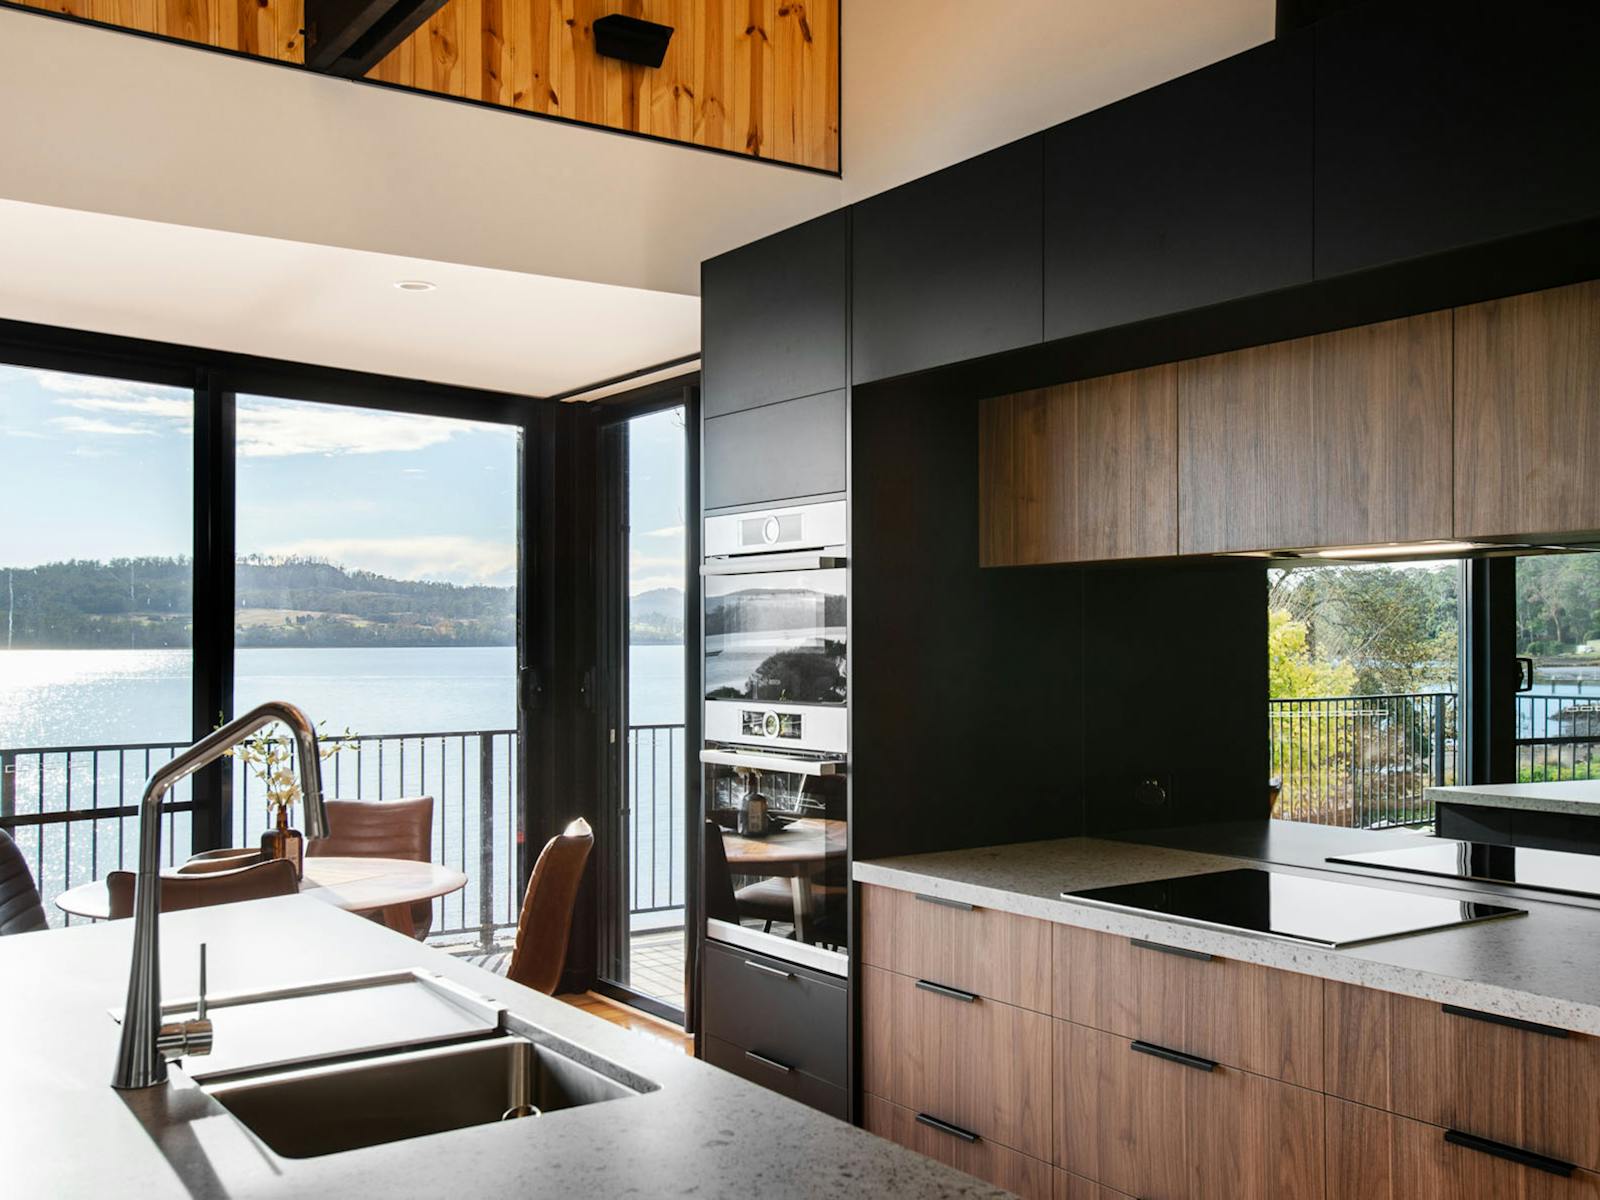 The sleek modern kitchen is a cooks paradise with stunning views of the river.